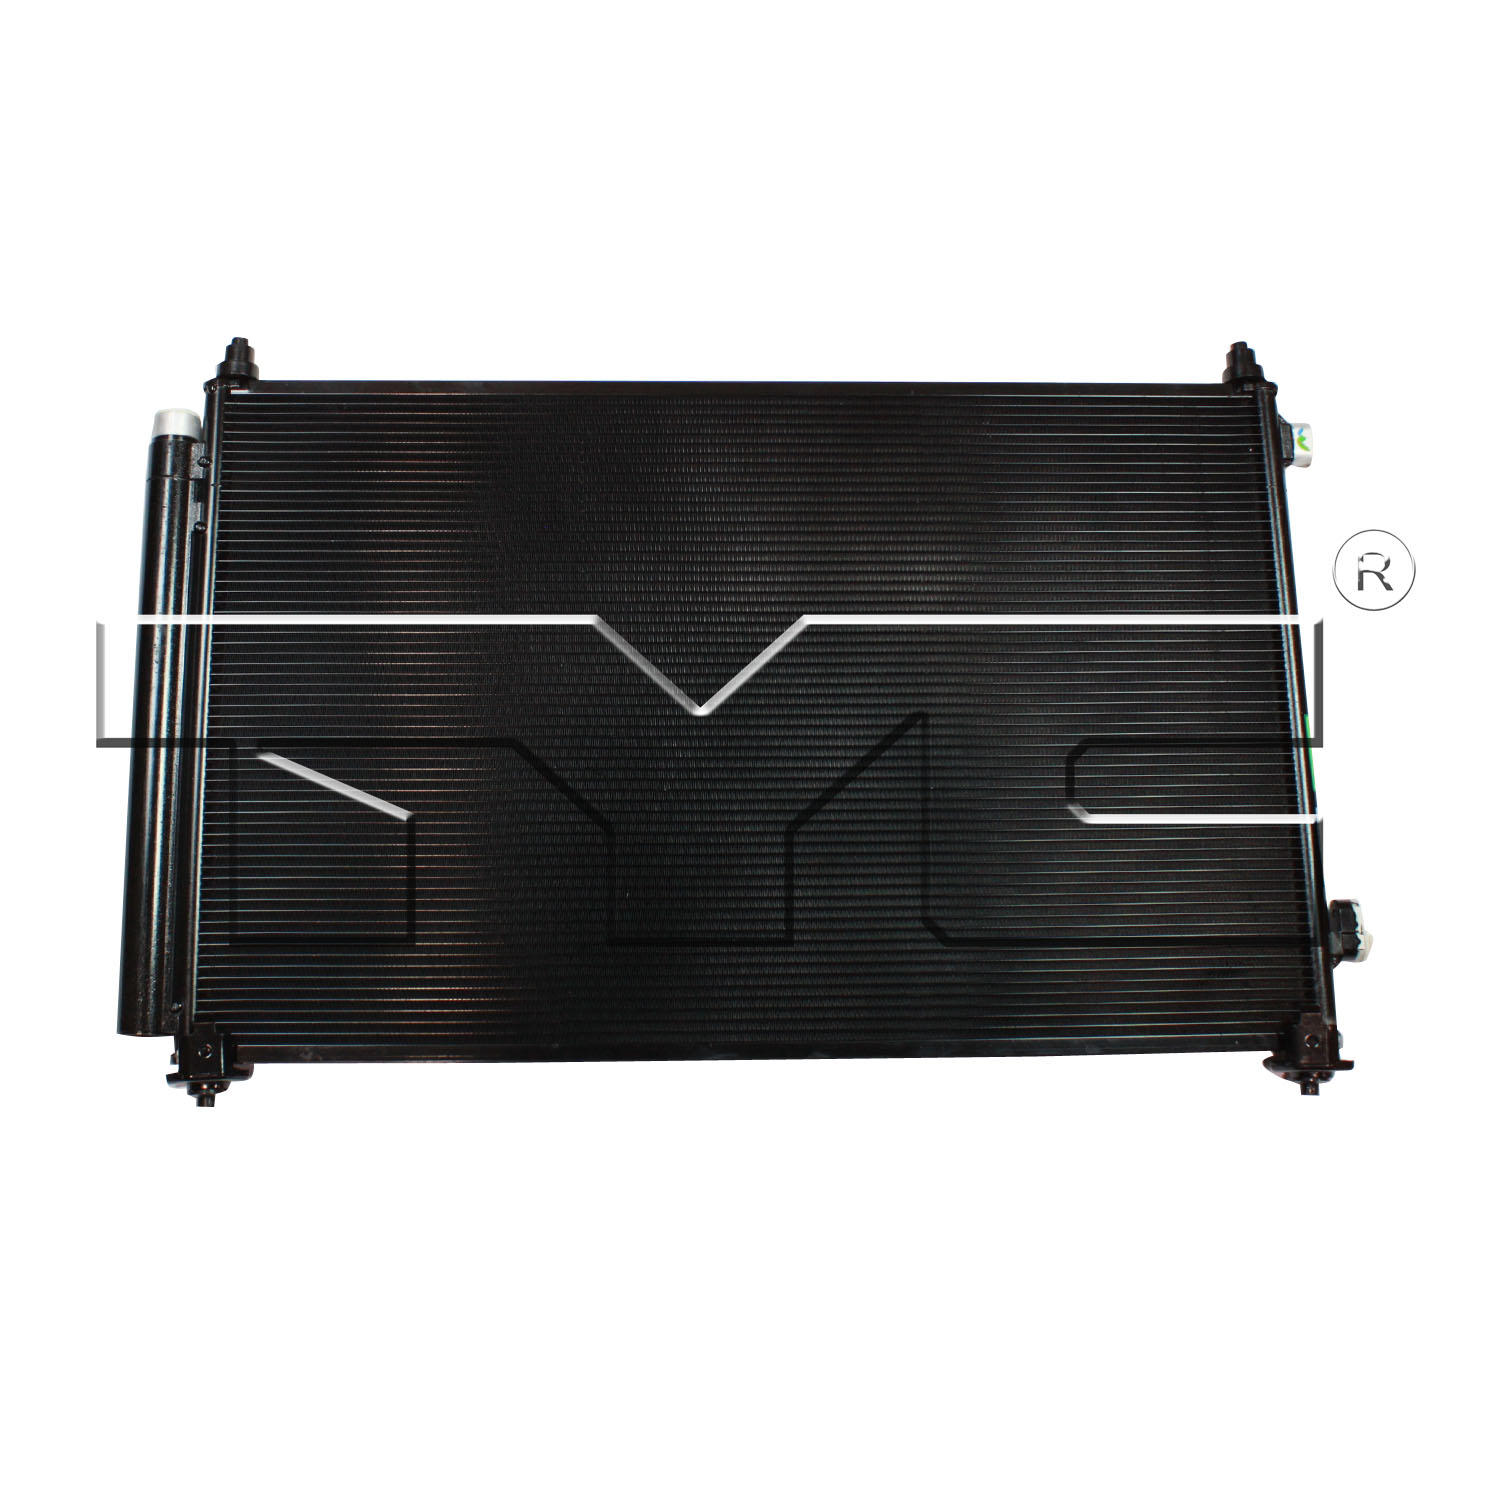 Aftermarket AC CONDENSERS for MAZDA - CX-9, CX-9,07-12,Air conditioning condenser